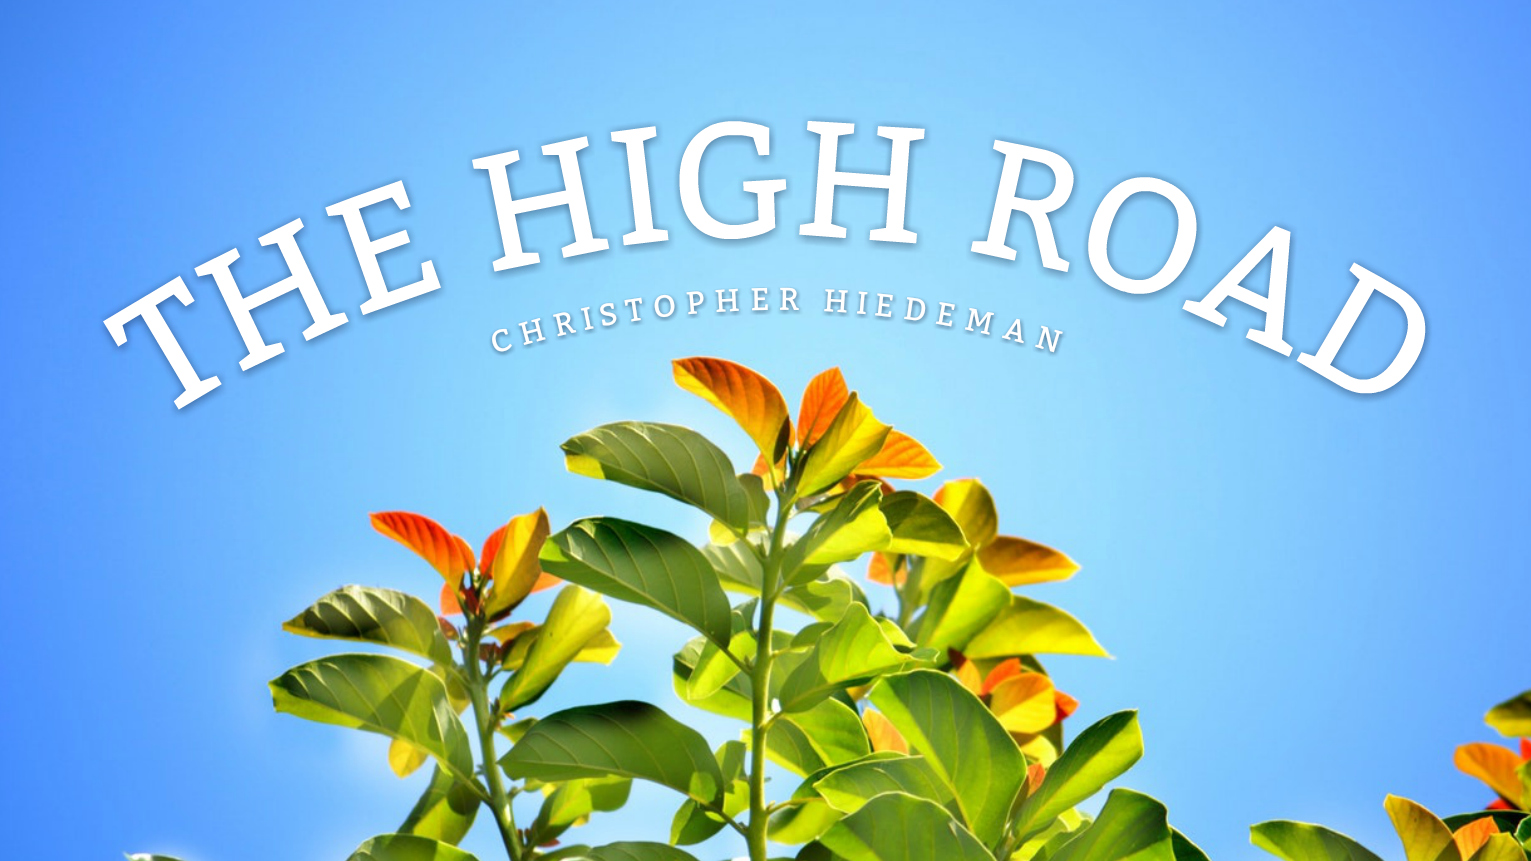 The High Road Story image.jpg